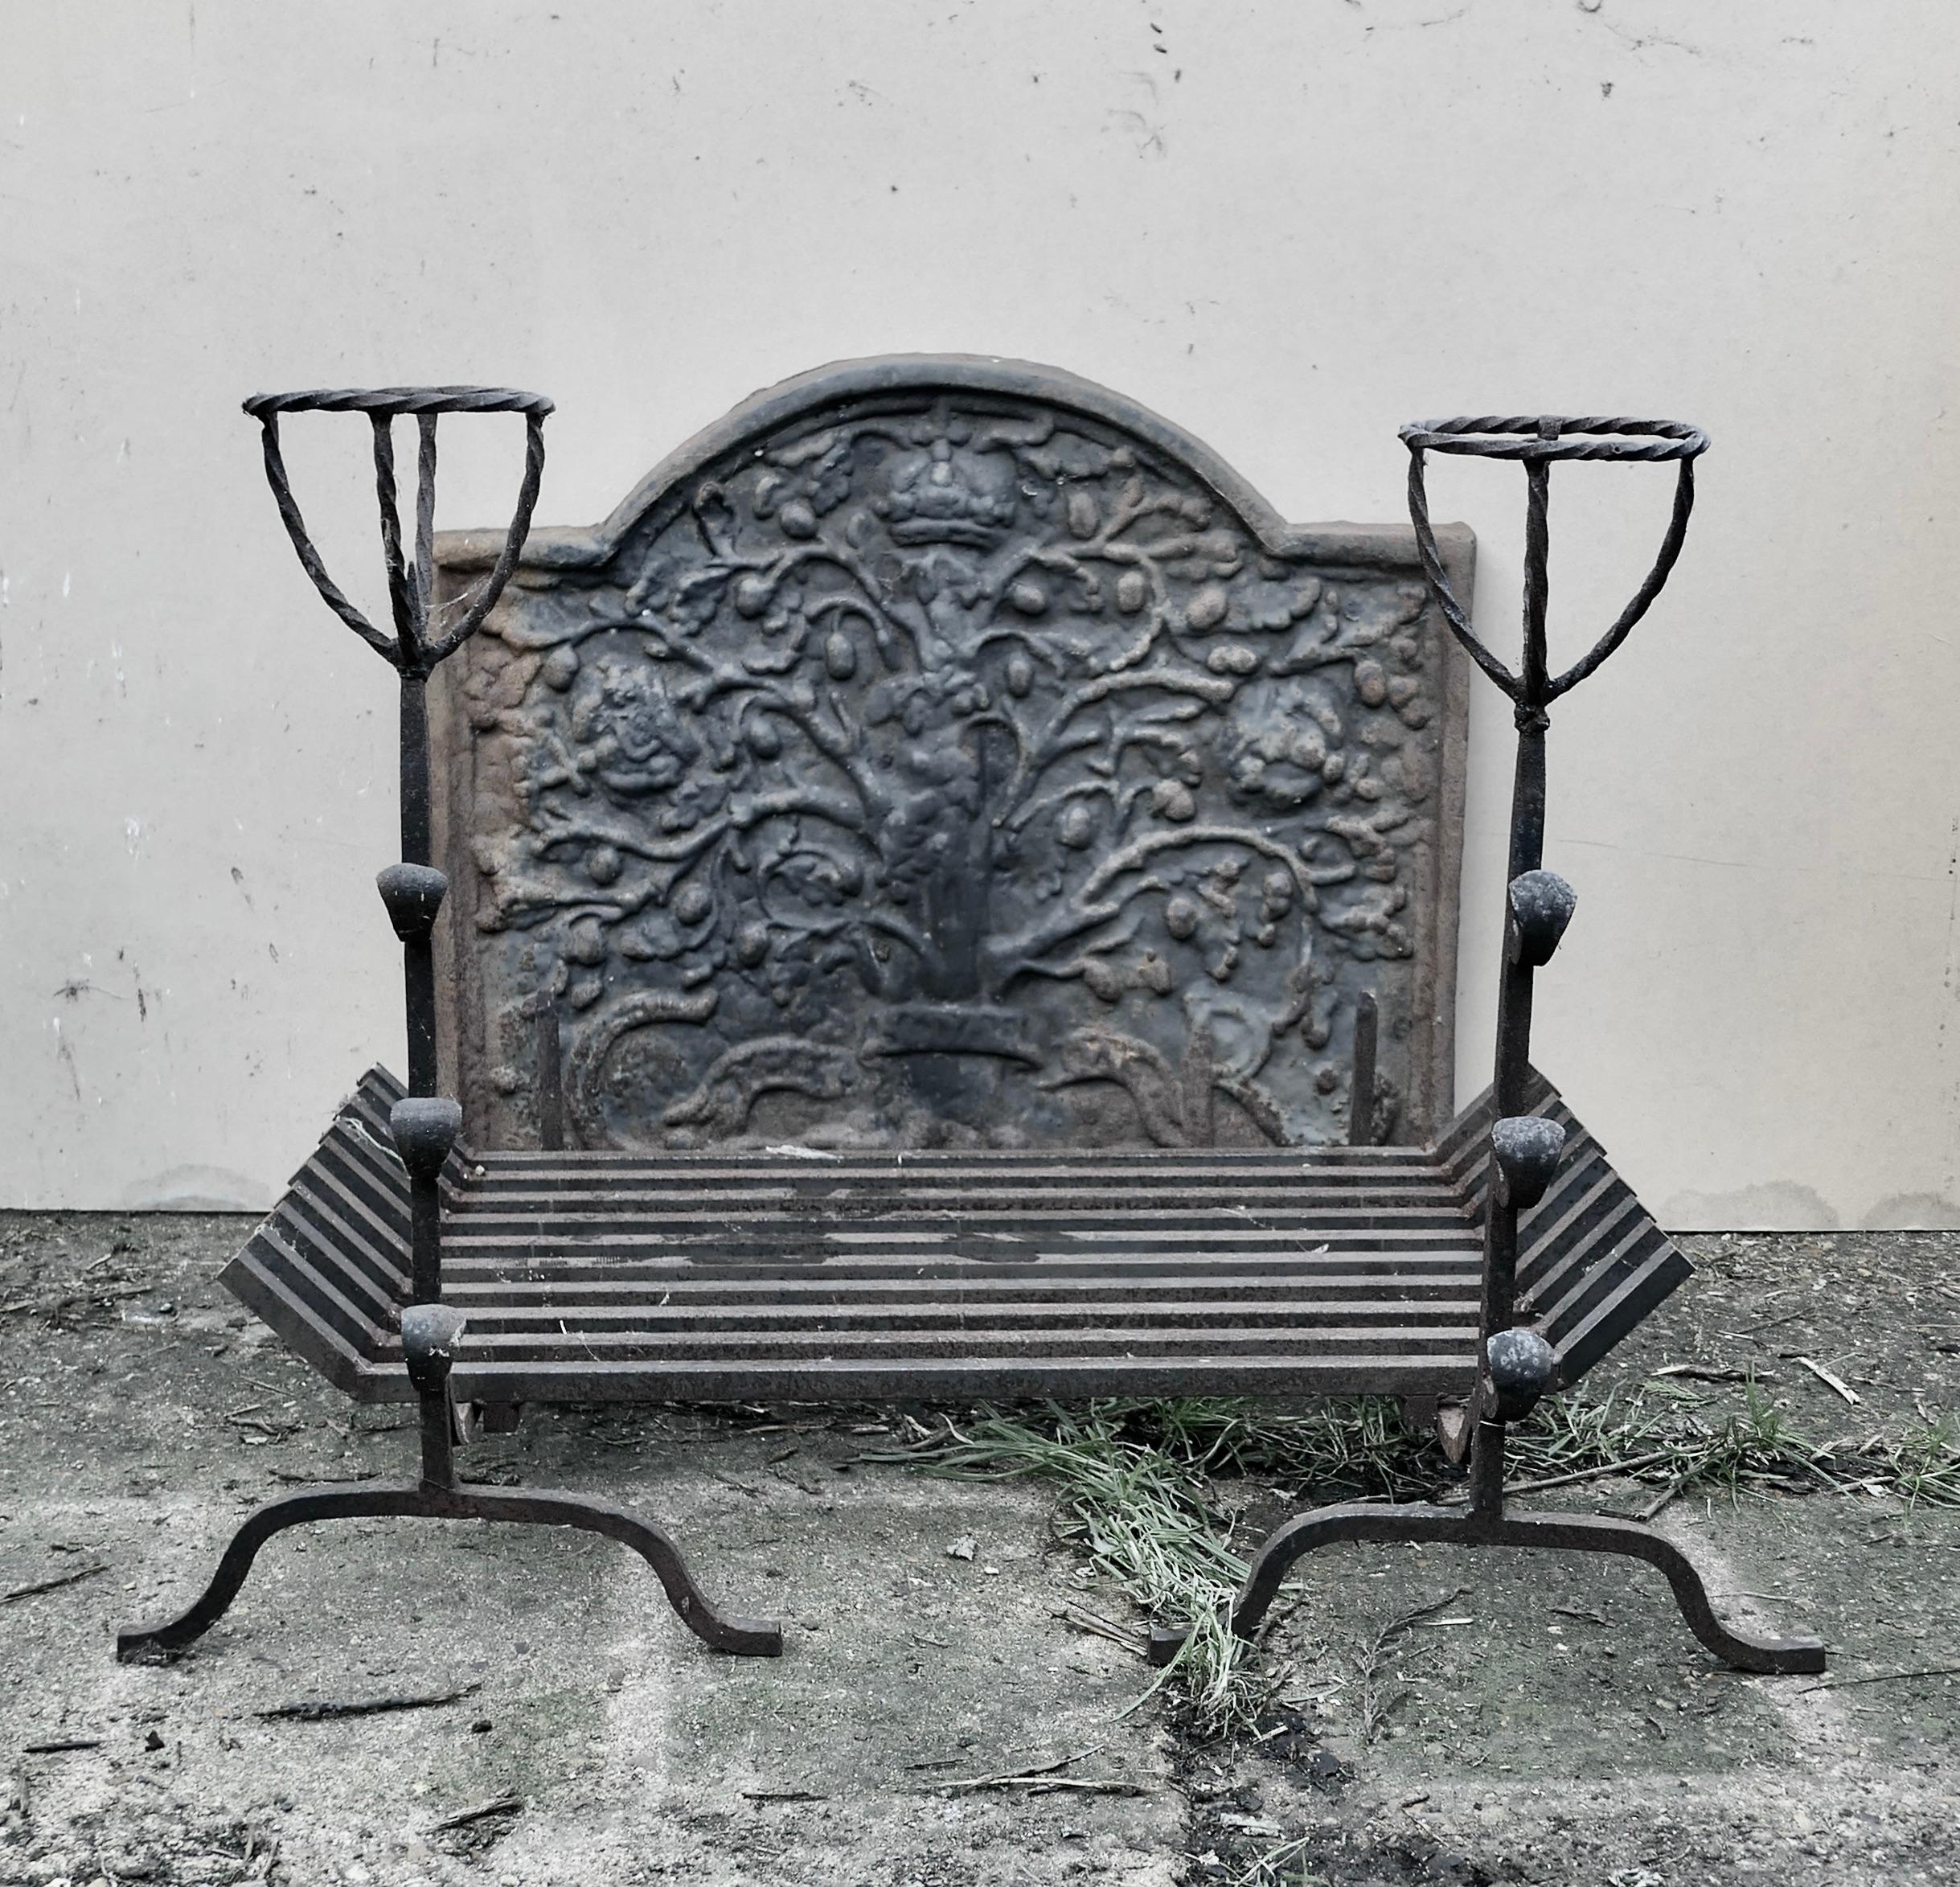  Large 18th Century Heavy Iron Fire Back, Andirons and Grate 

This is an Early Very Heavy Large Fire Back Matched with an 18th Century Pair of Iron Andirons and a replacement Large Grate 

The fire back is definitely not a reproduction it is an